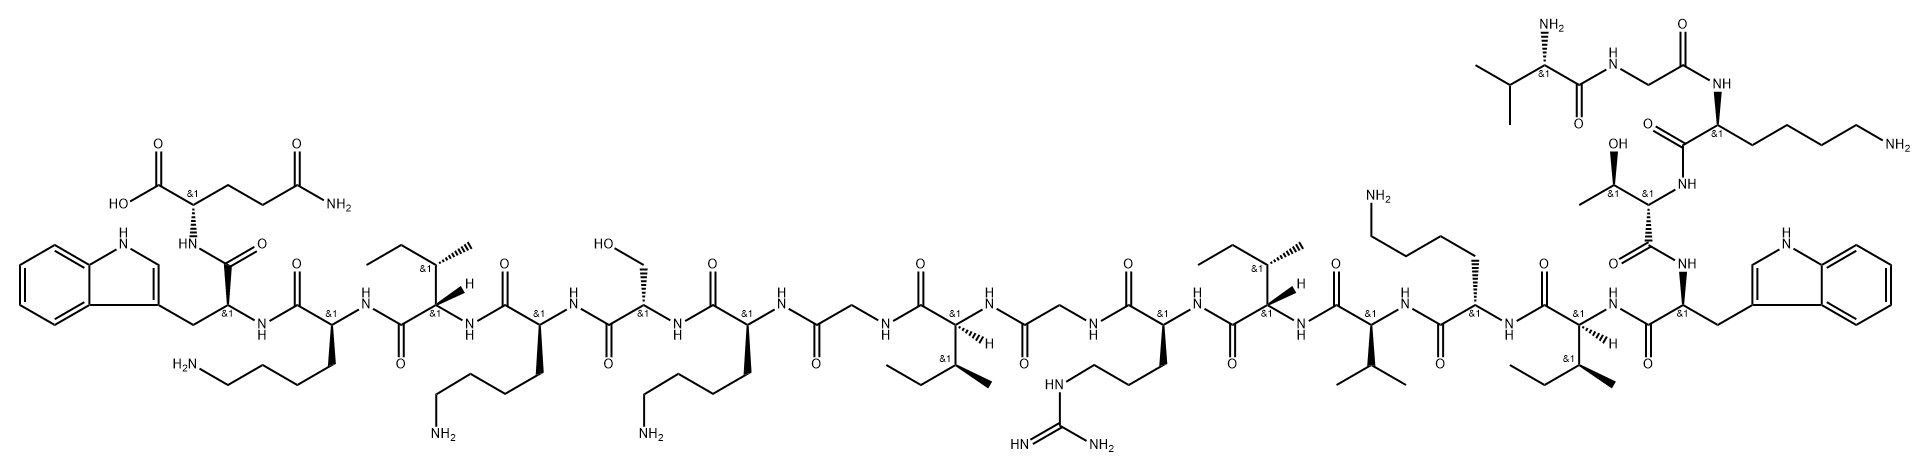 Bactrocerin-1 Structure